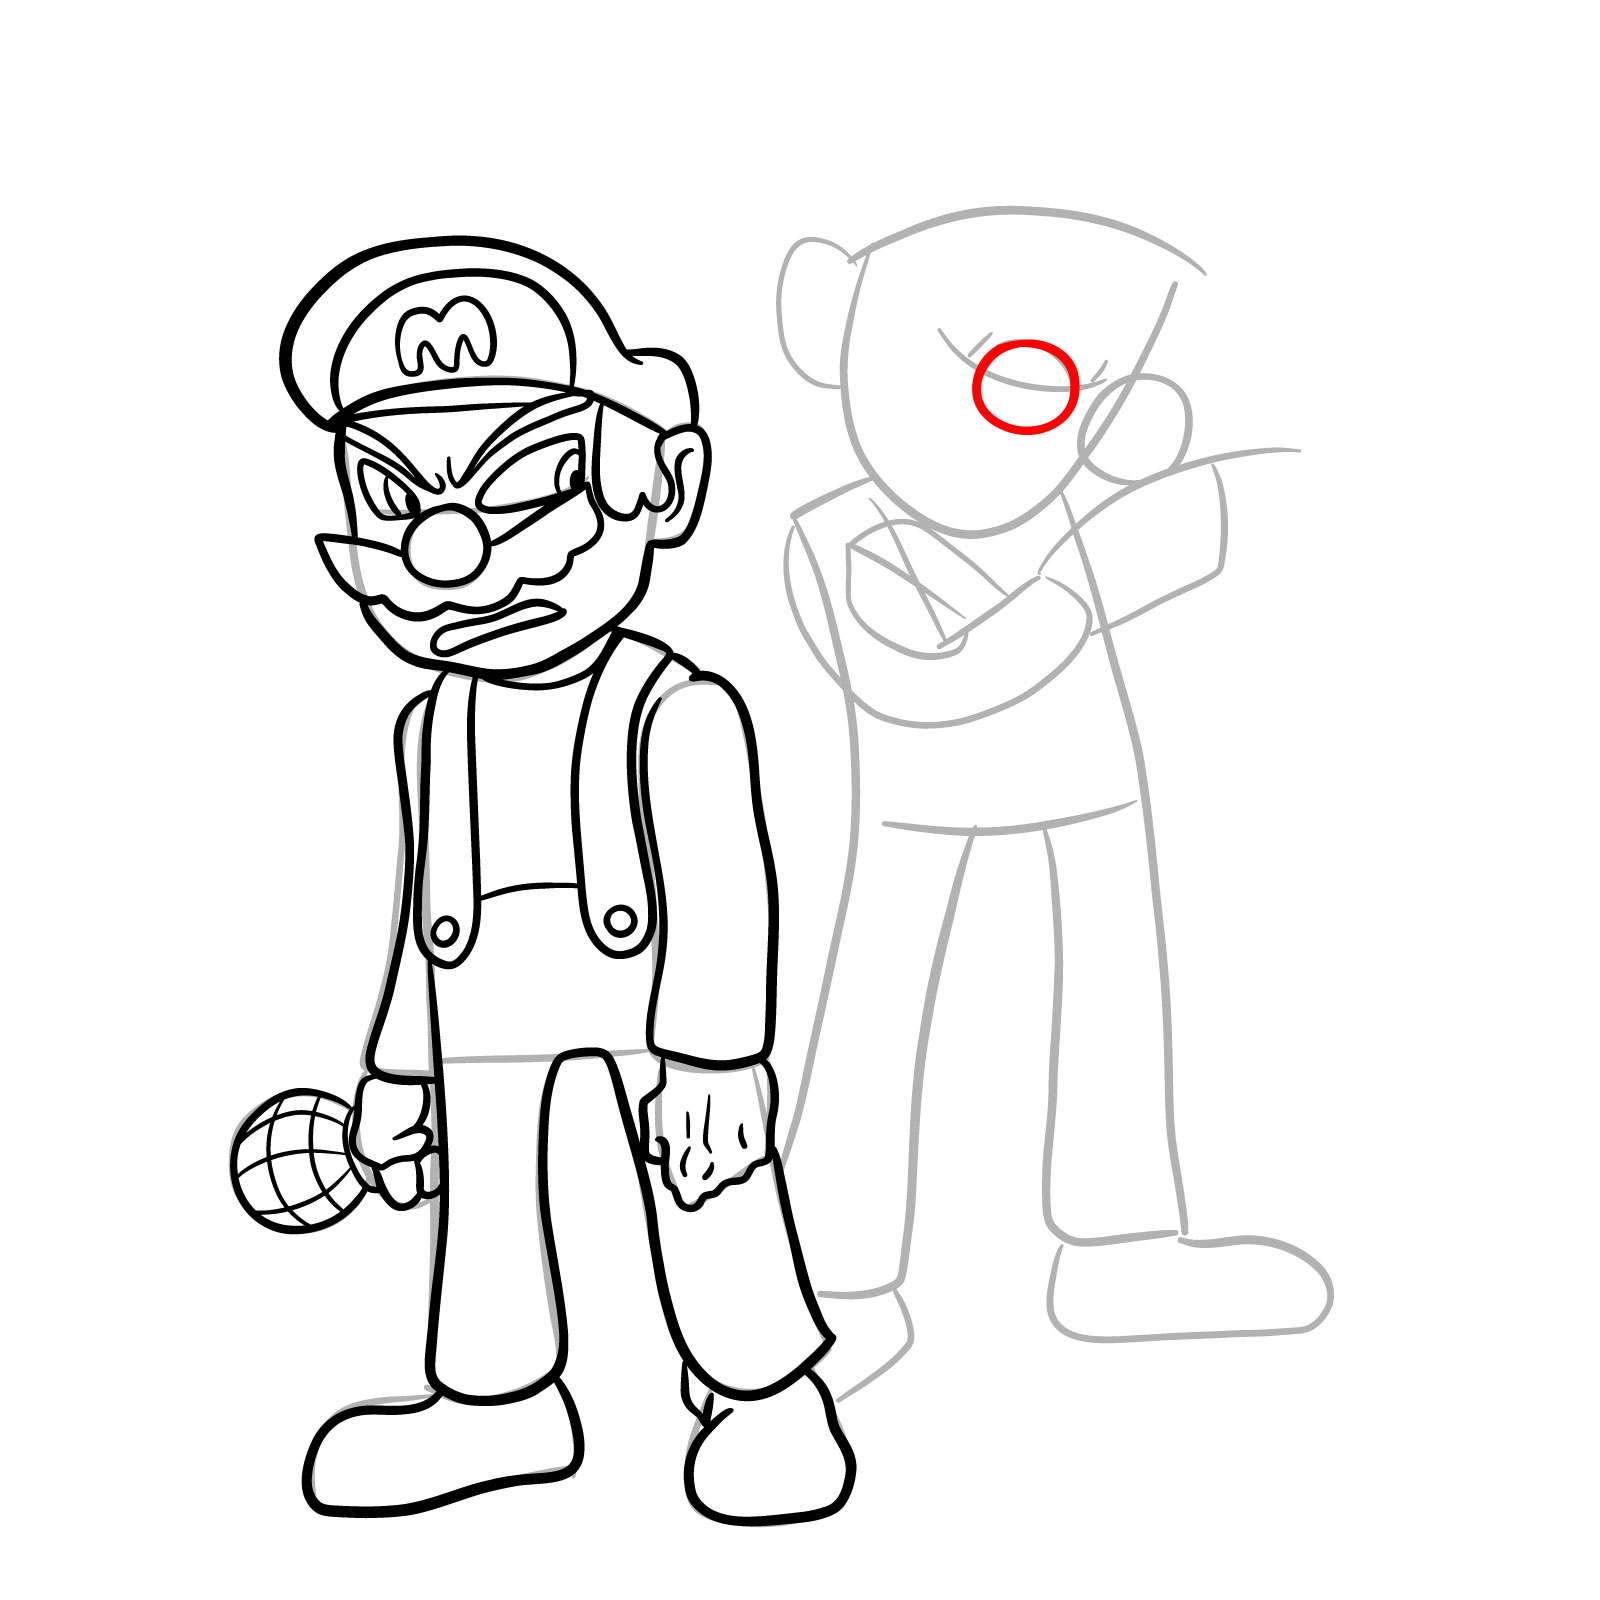 How to draw Mario and Luigi from Tails Gets Trolled - step 23